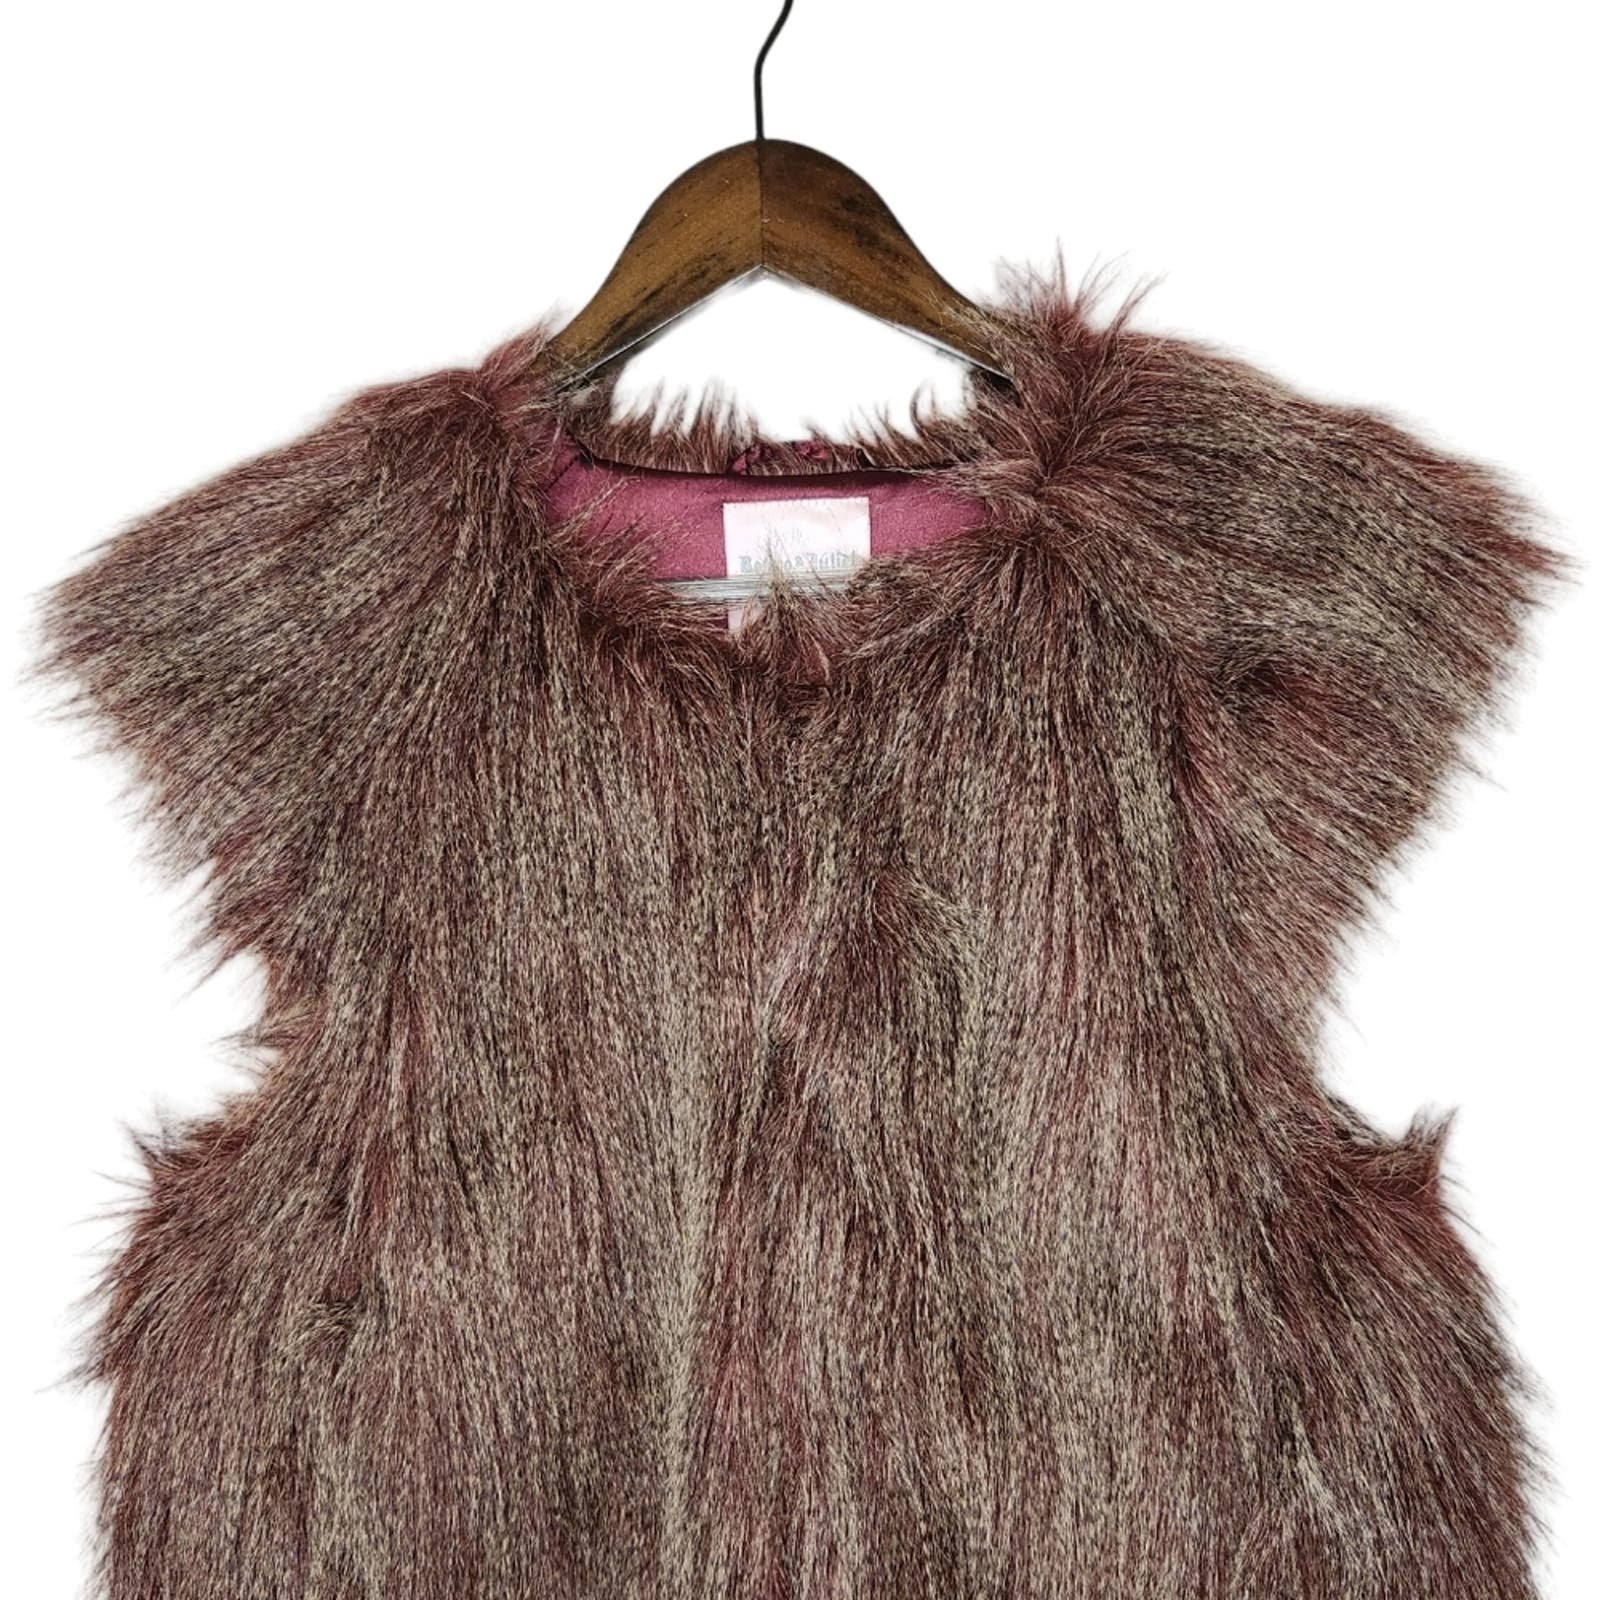 reasonable price NWT Romeo & Juliet Couture faux fur strong shoulder vest Medium pquCu0nYK no tax